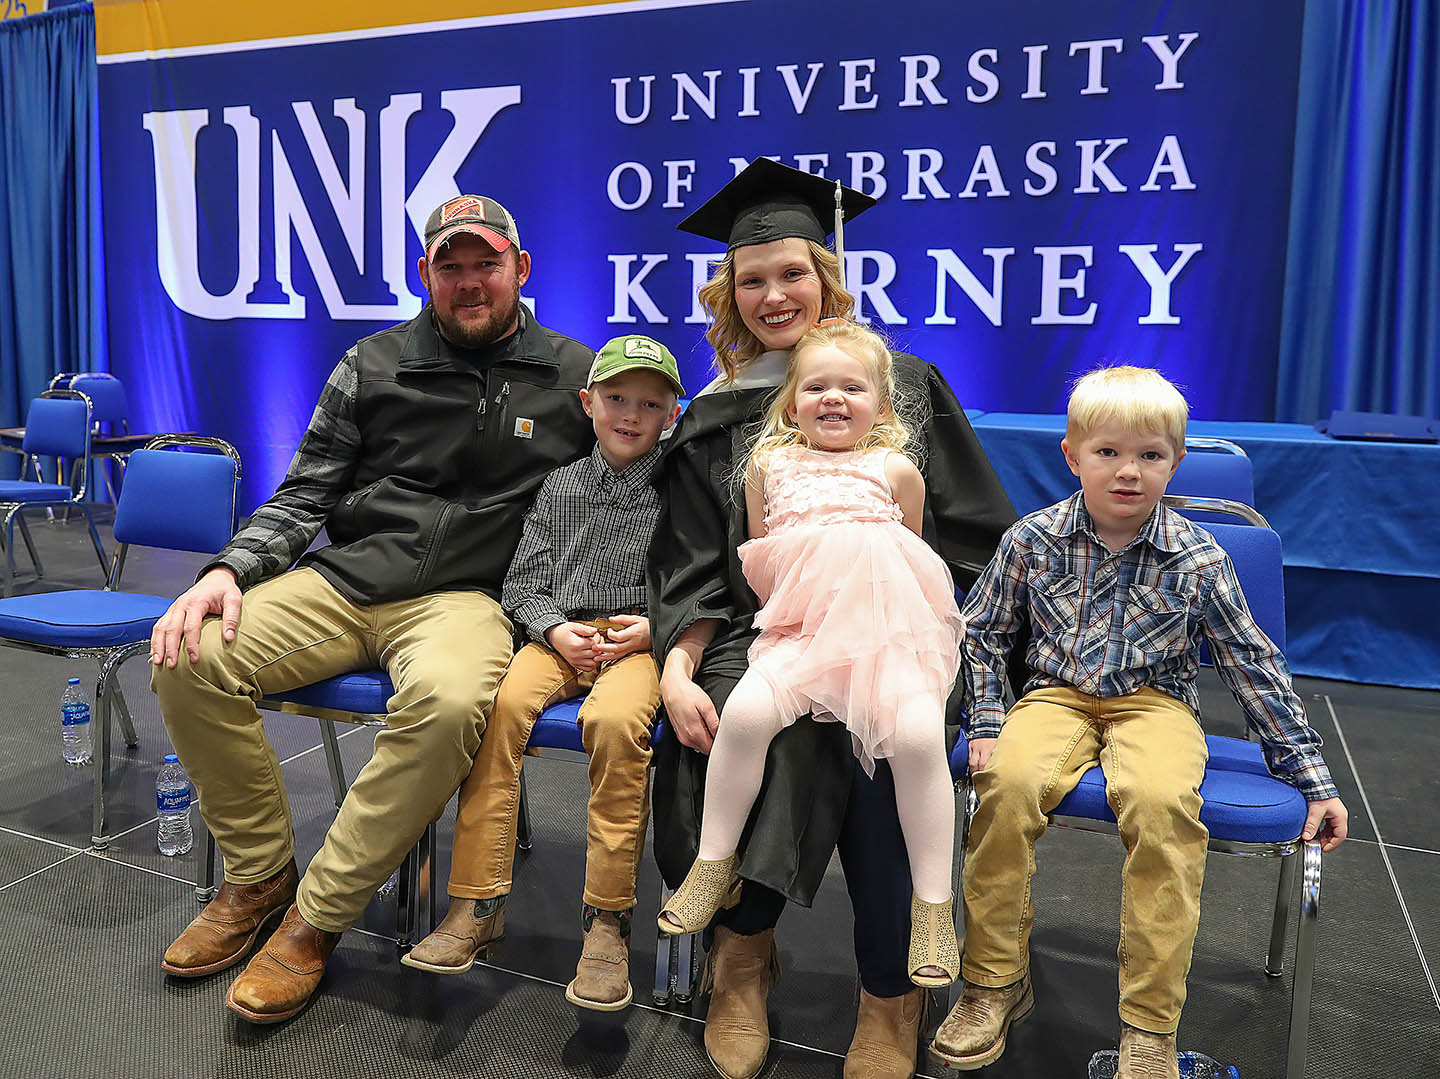 Nicole Strope is pictured with her husband Shane and their children Boe, Lea and Coy following Friday’s winter commencement ceremony at UNK. (Photo by Erika Pritchard, UNK Communications)